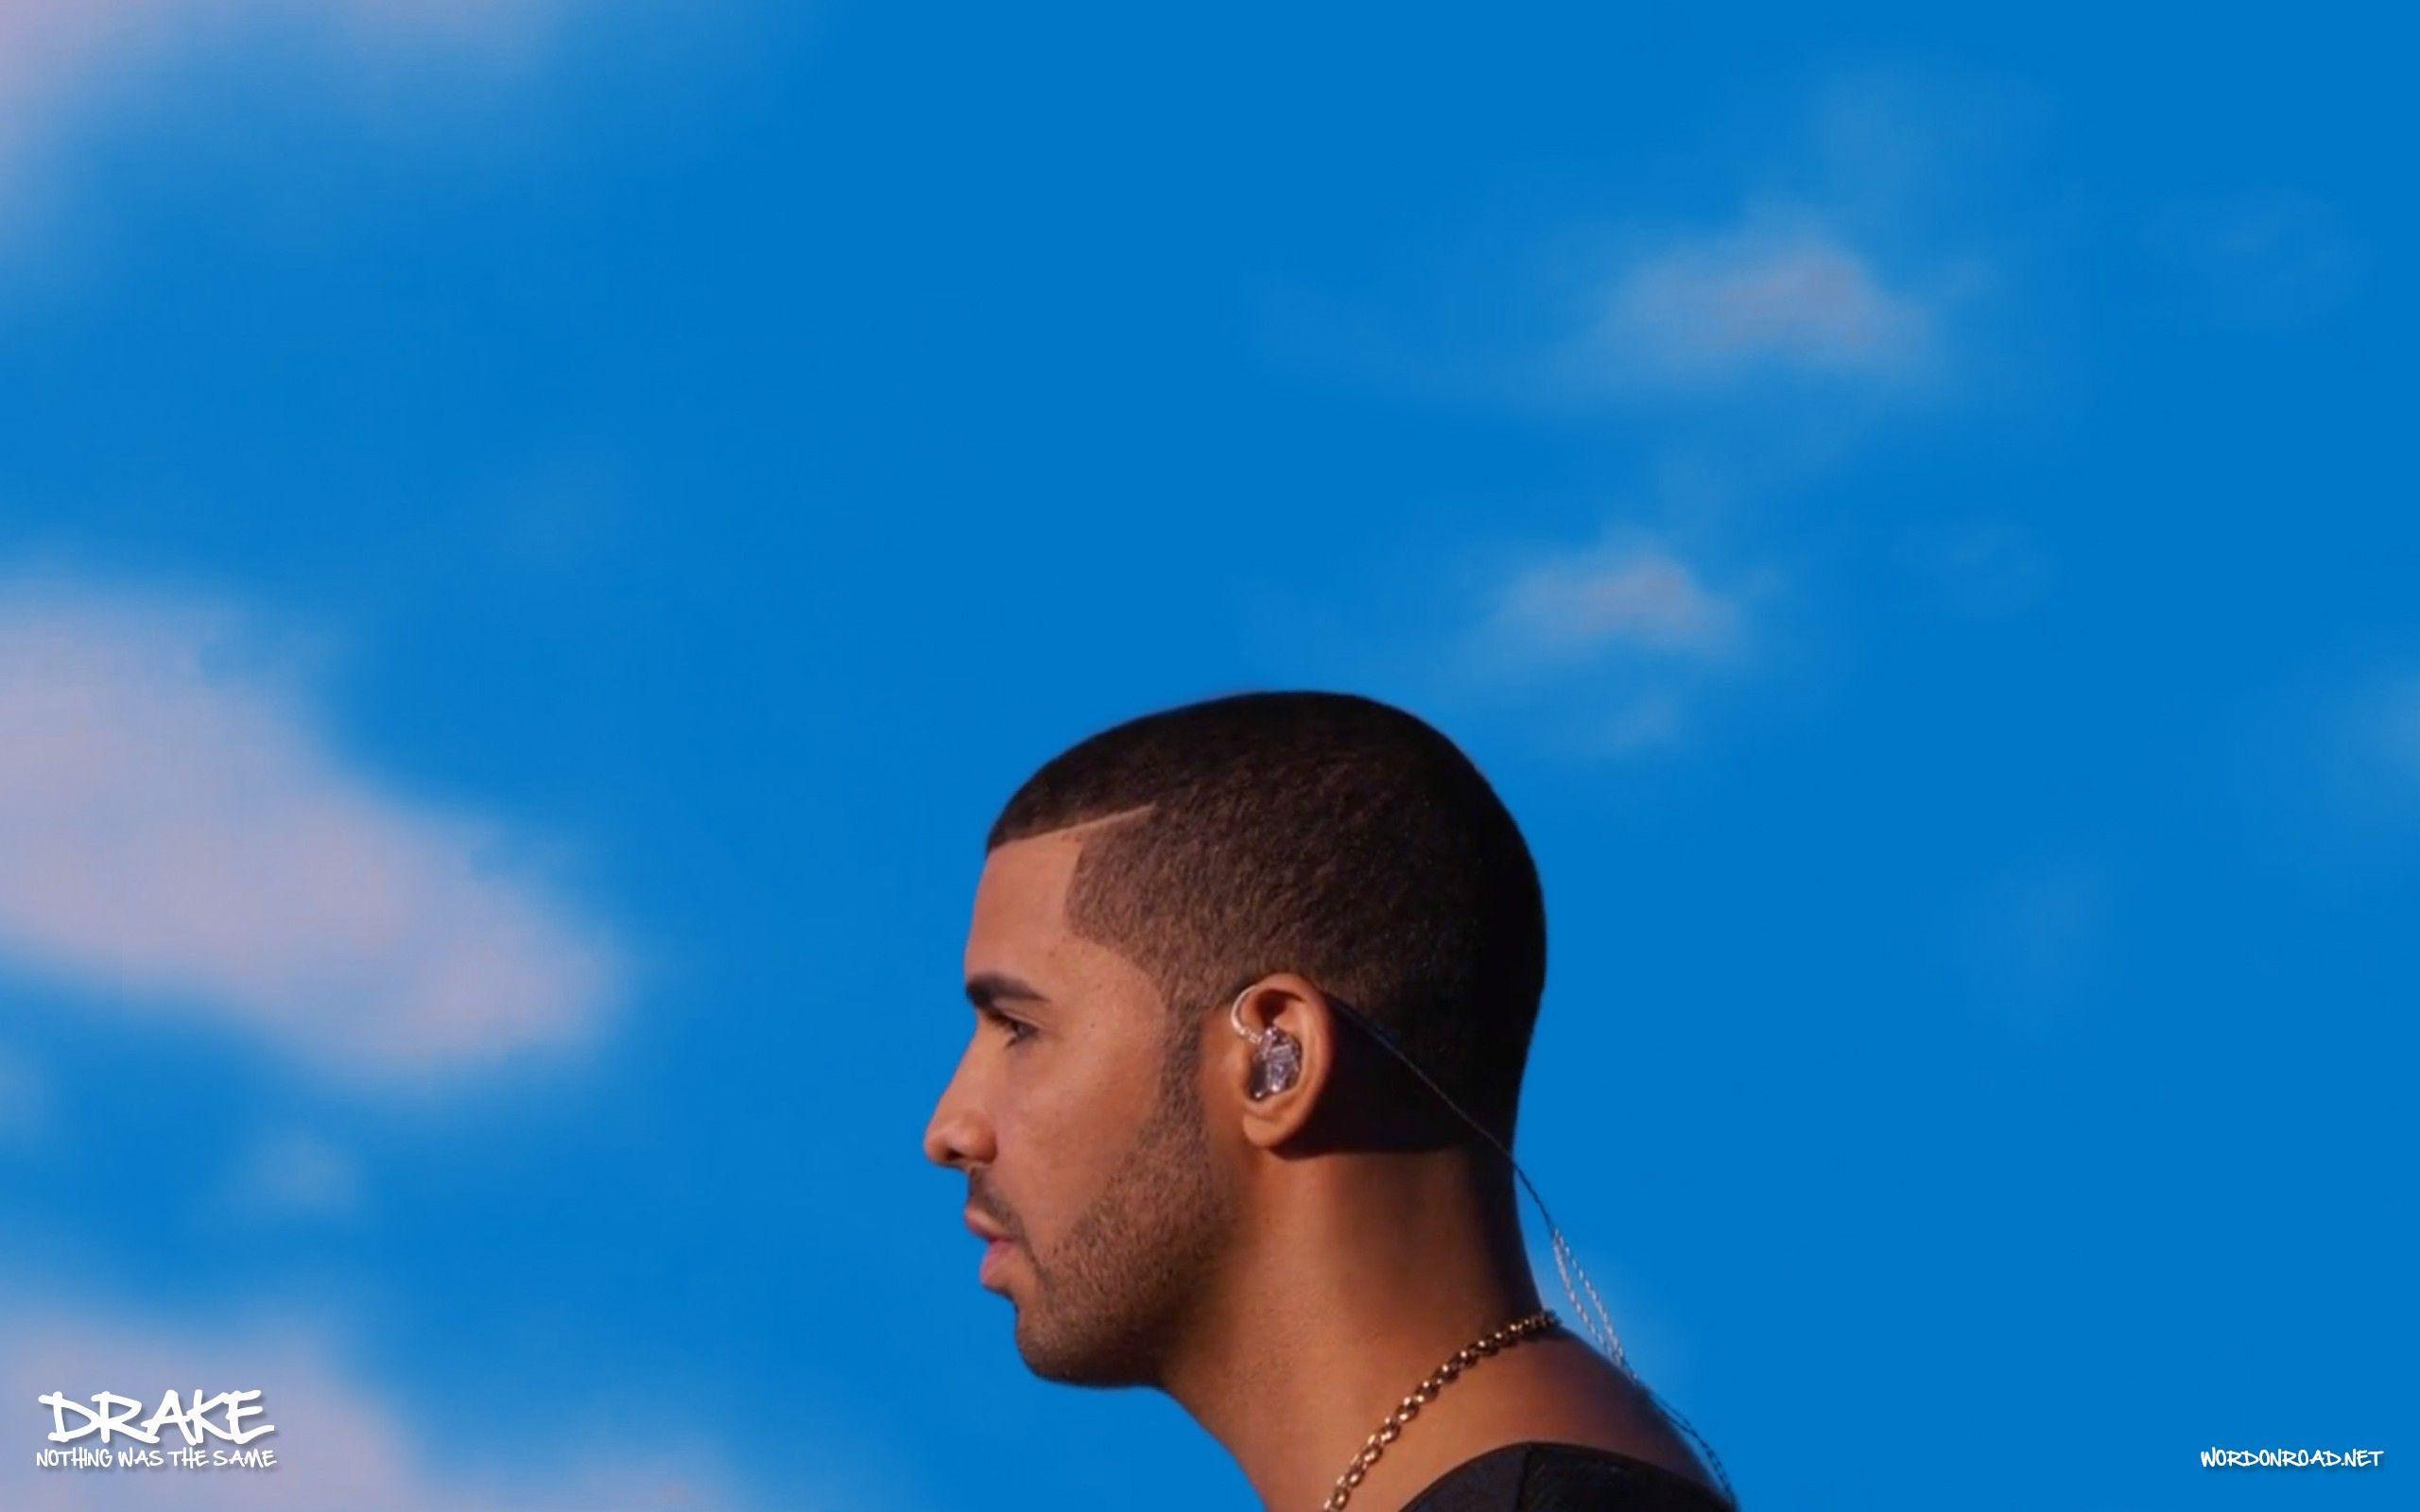 drake nothing was the same m4a